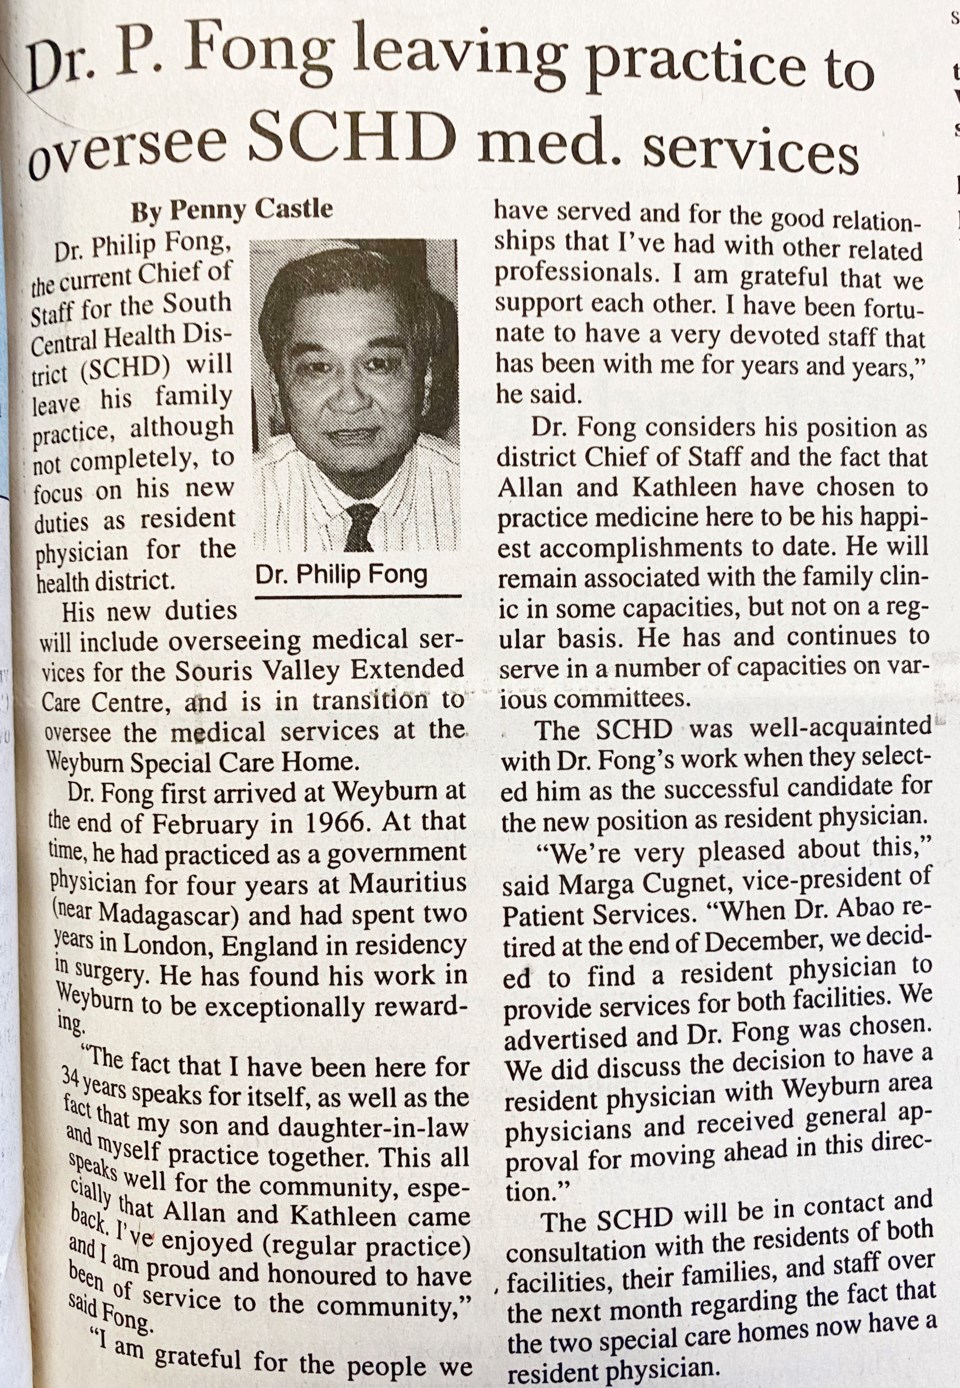 20 years ago Dr Fong